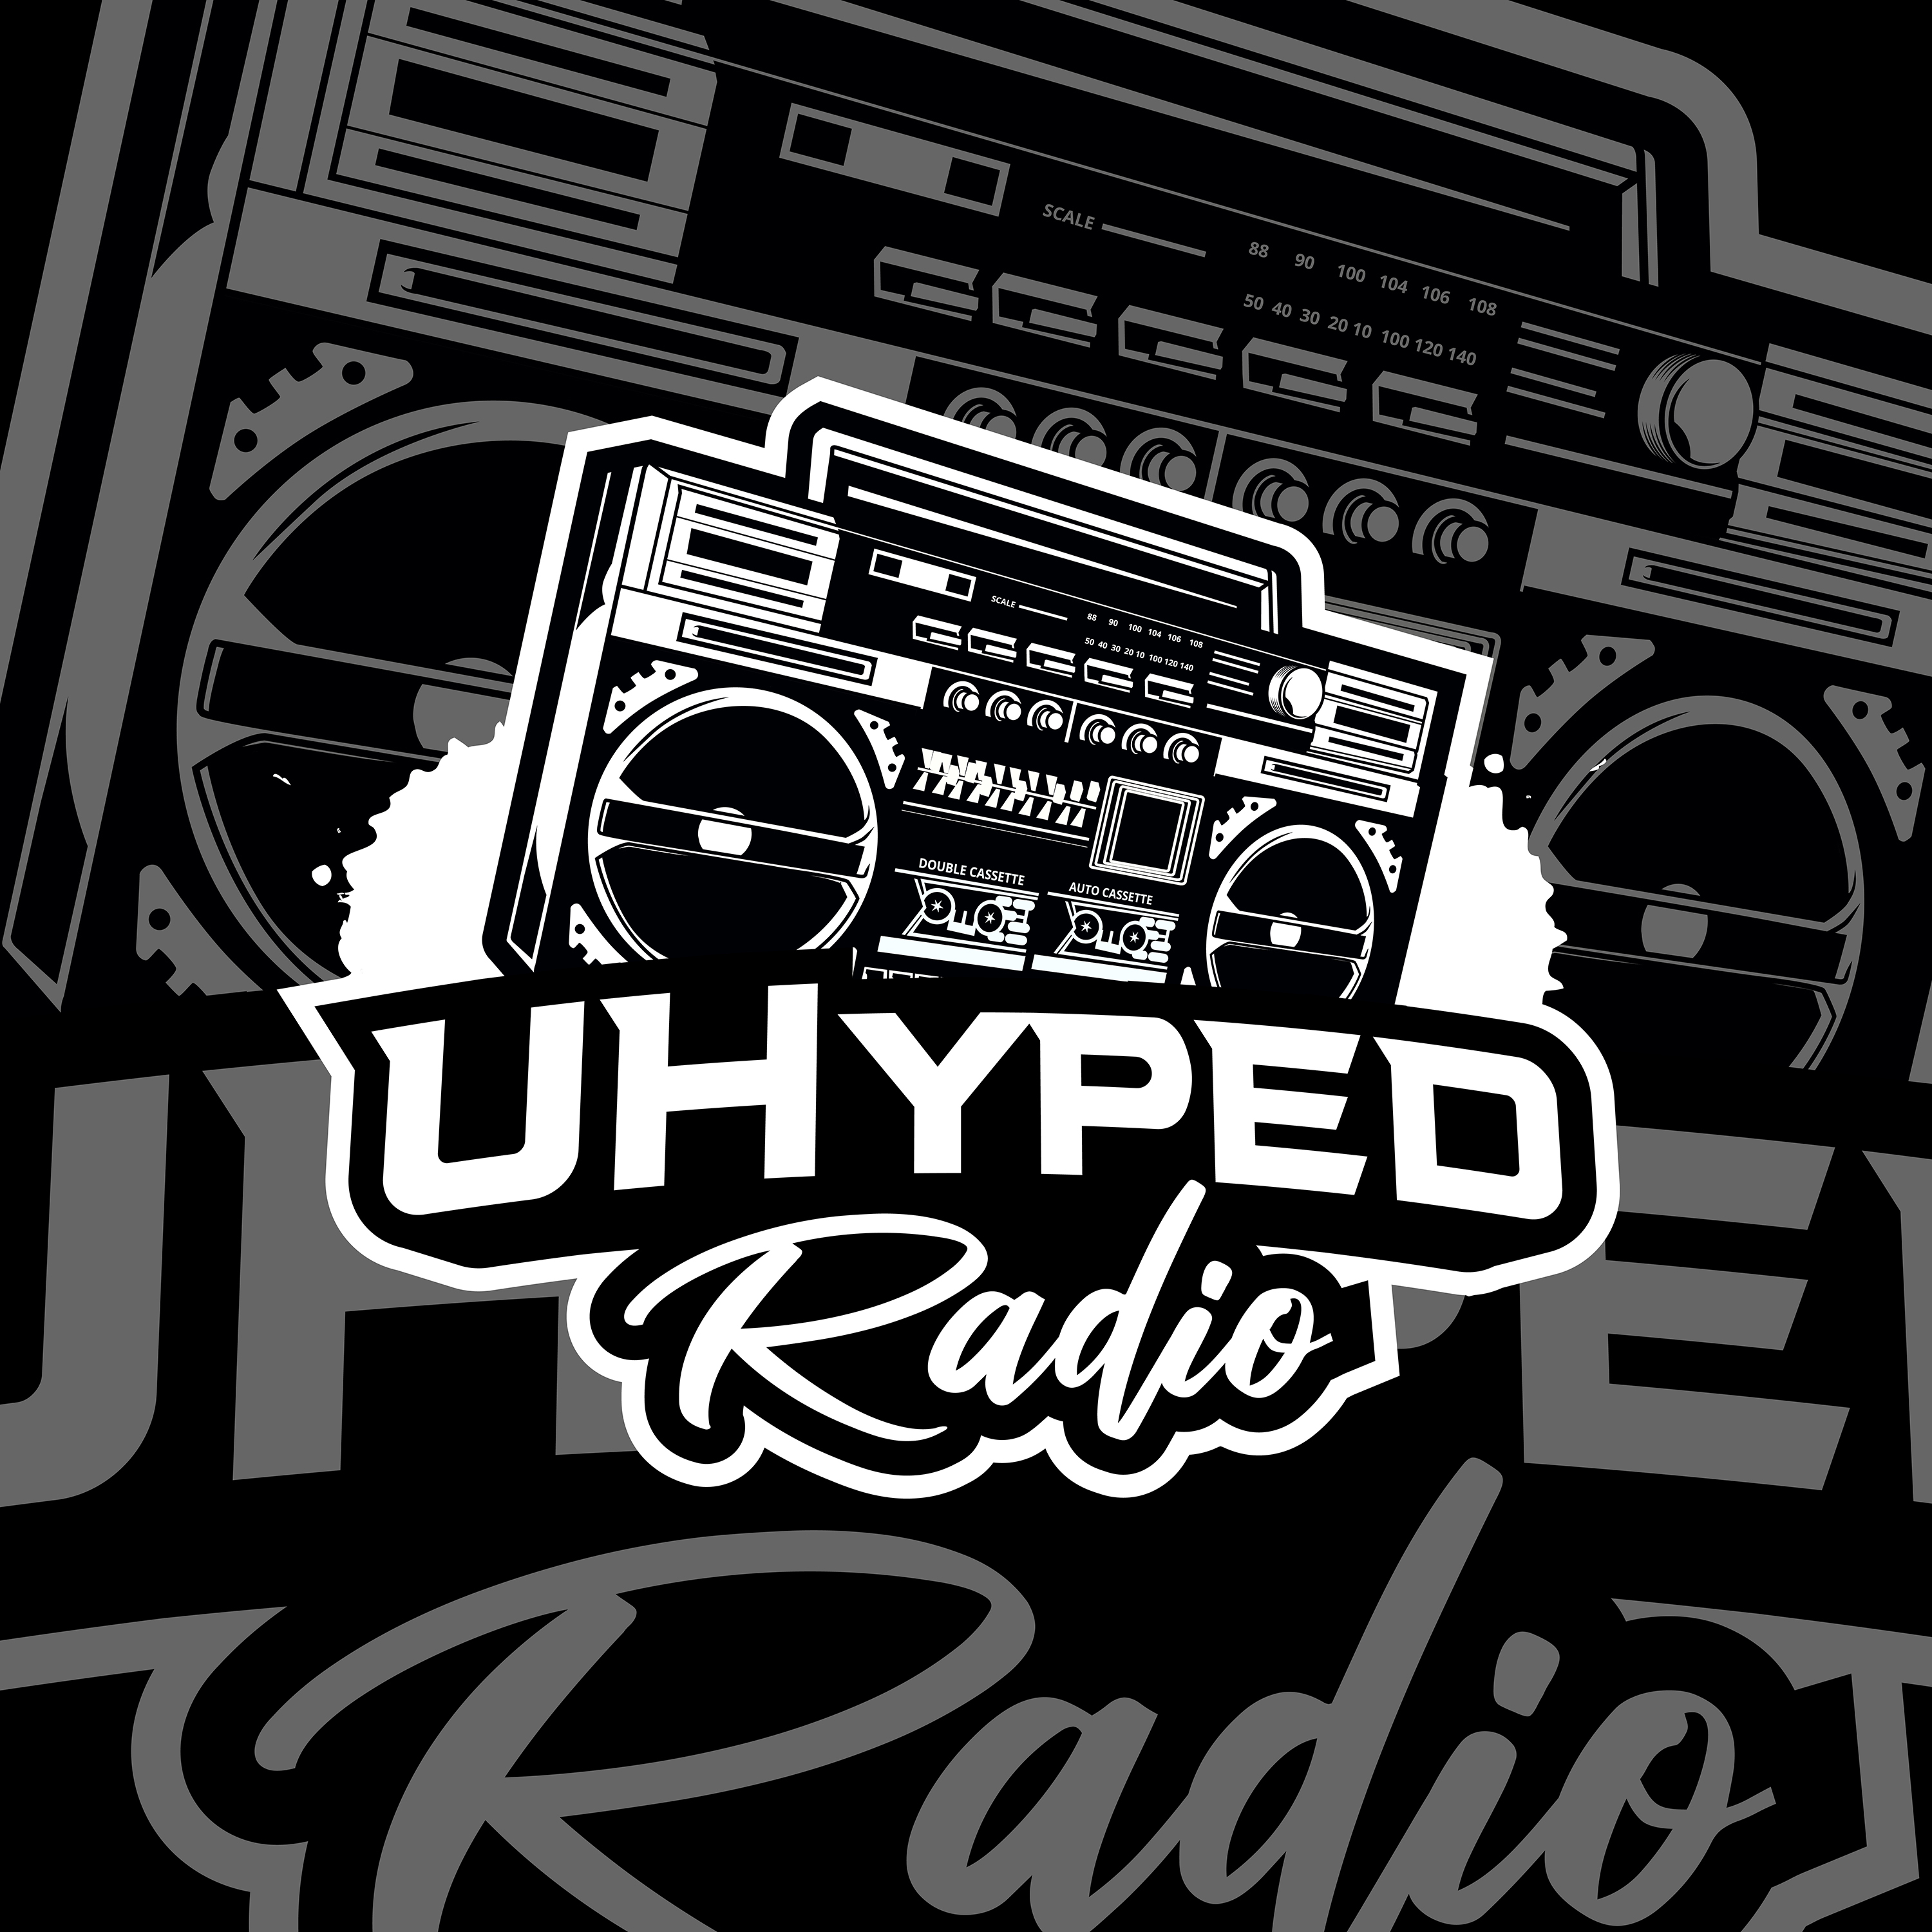 Art for Forgotten Gems New Music All Genres 247 UHyped Radio (2) by UHyped Radio